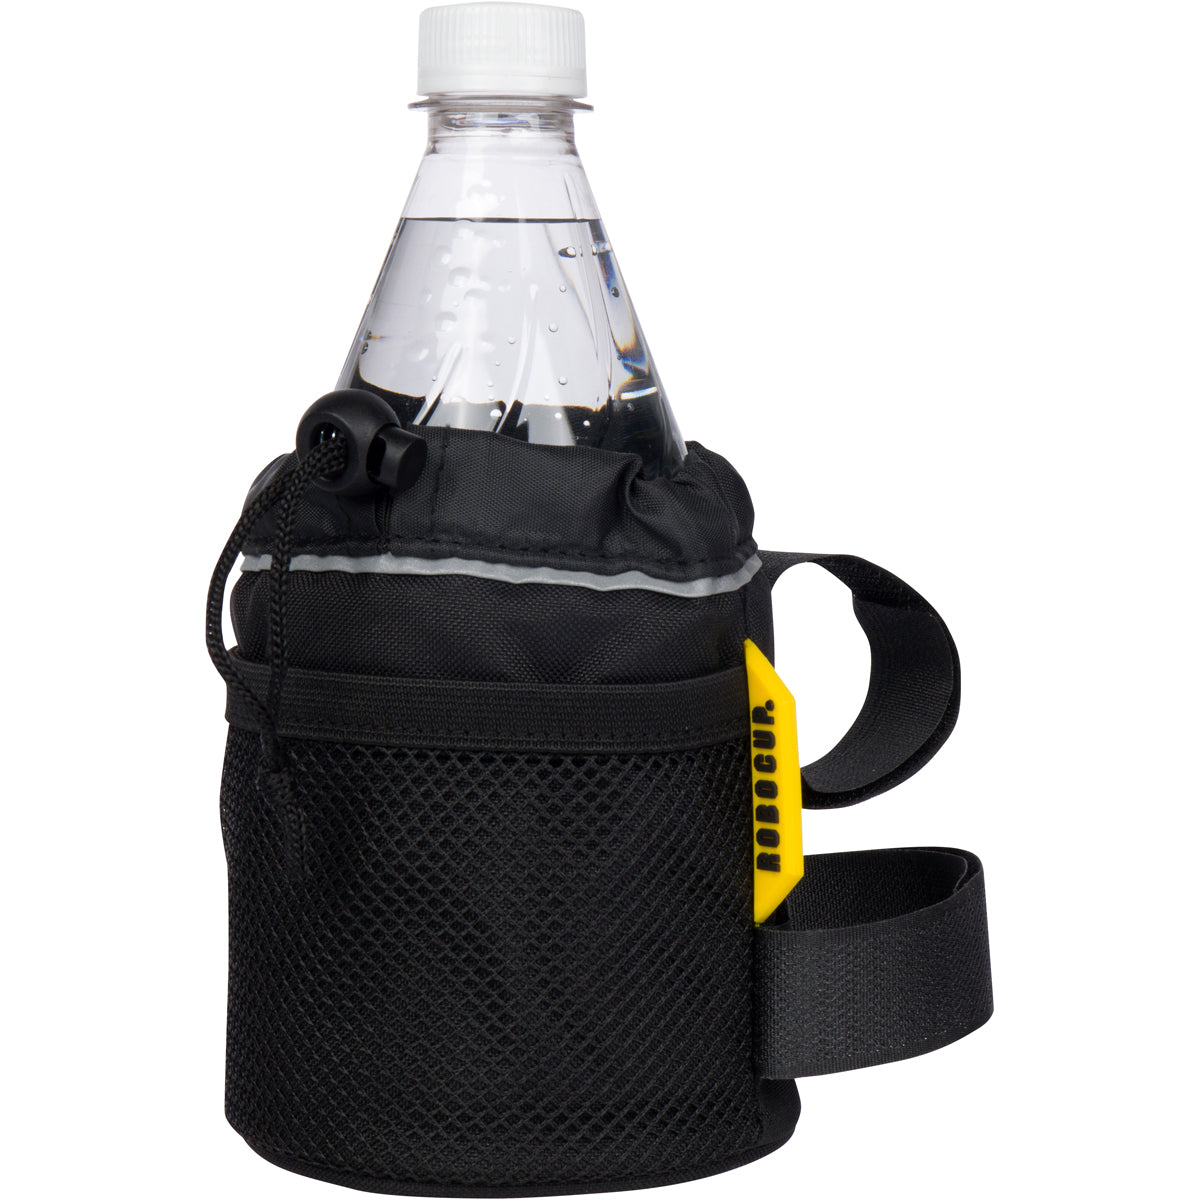 Bicycle & Scooter Drink Holder: Medium 4.9" H x 3.6" W